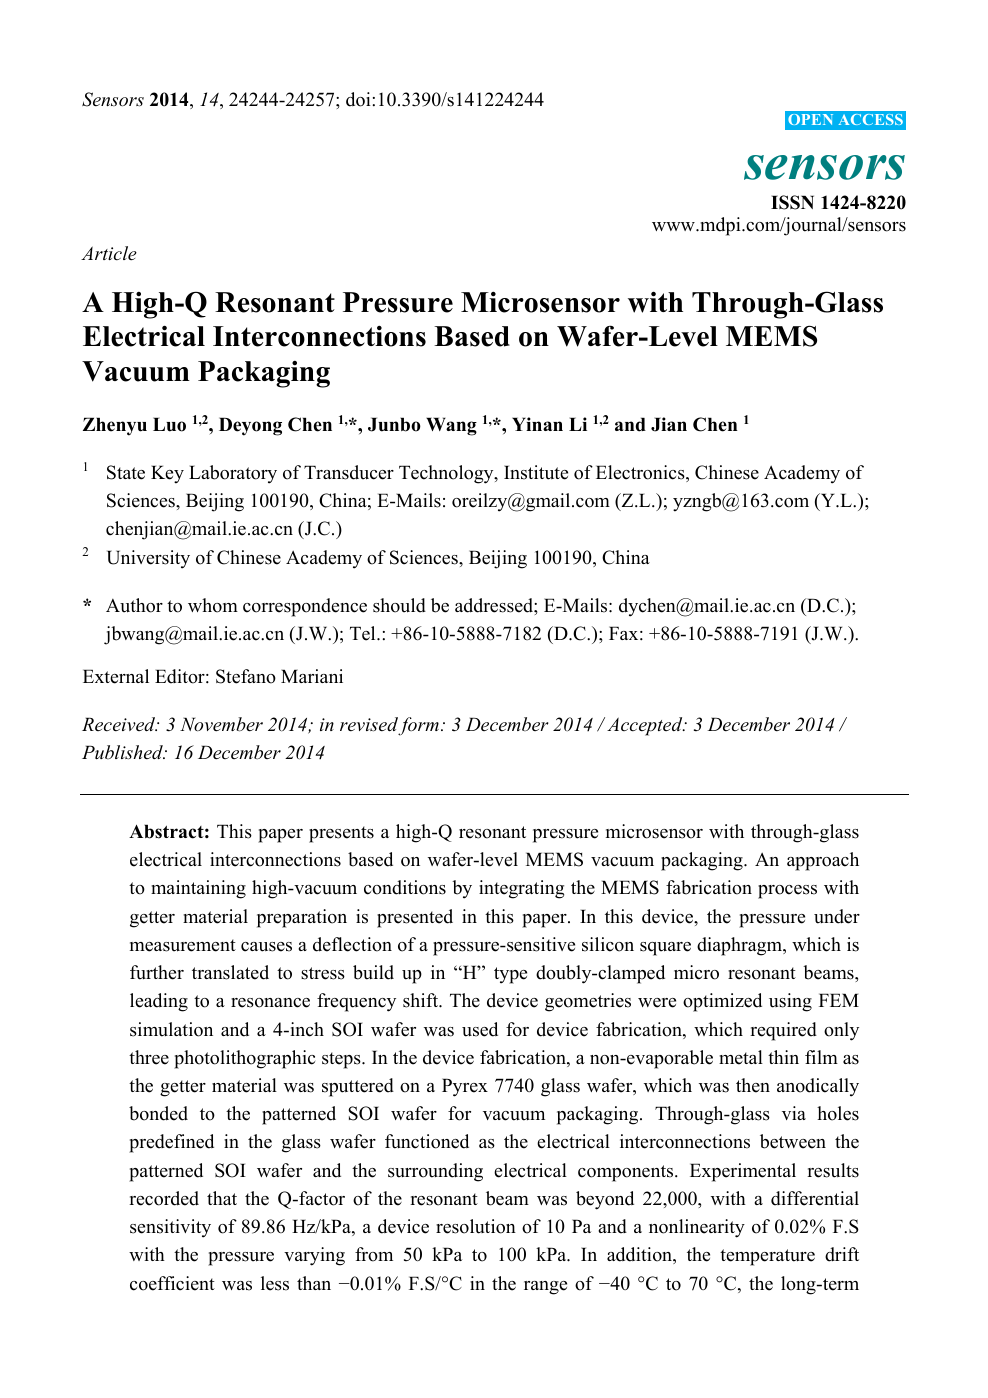 A High Q Resonant Pressure Microsensor With Through Glass Electrical Interconnections Based On Wafer Level Mems Vacuum Packaging Topic Of Research Paper In Nano Technology Download Scholarly Article Pdf And Read For Free On Cyberleninka